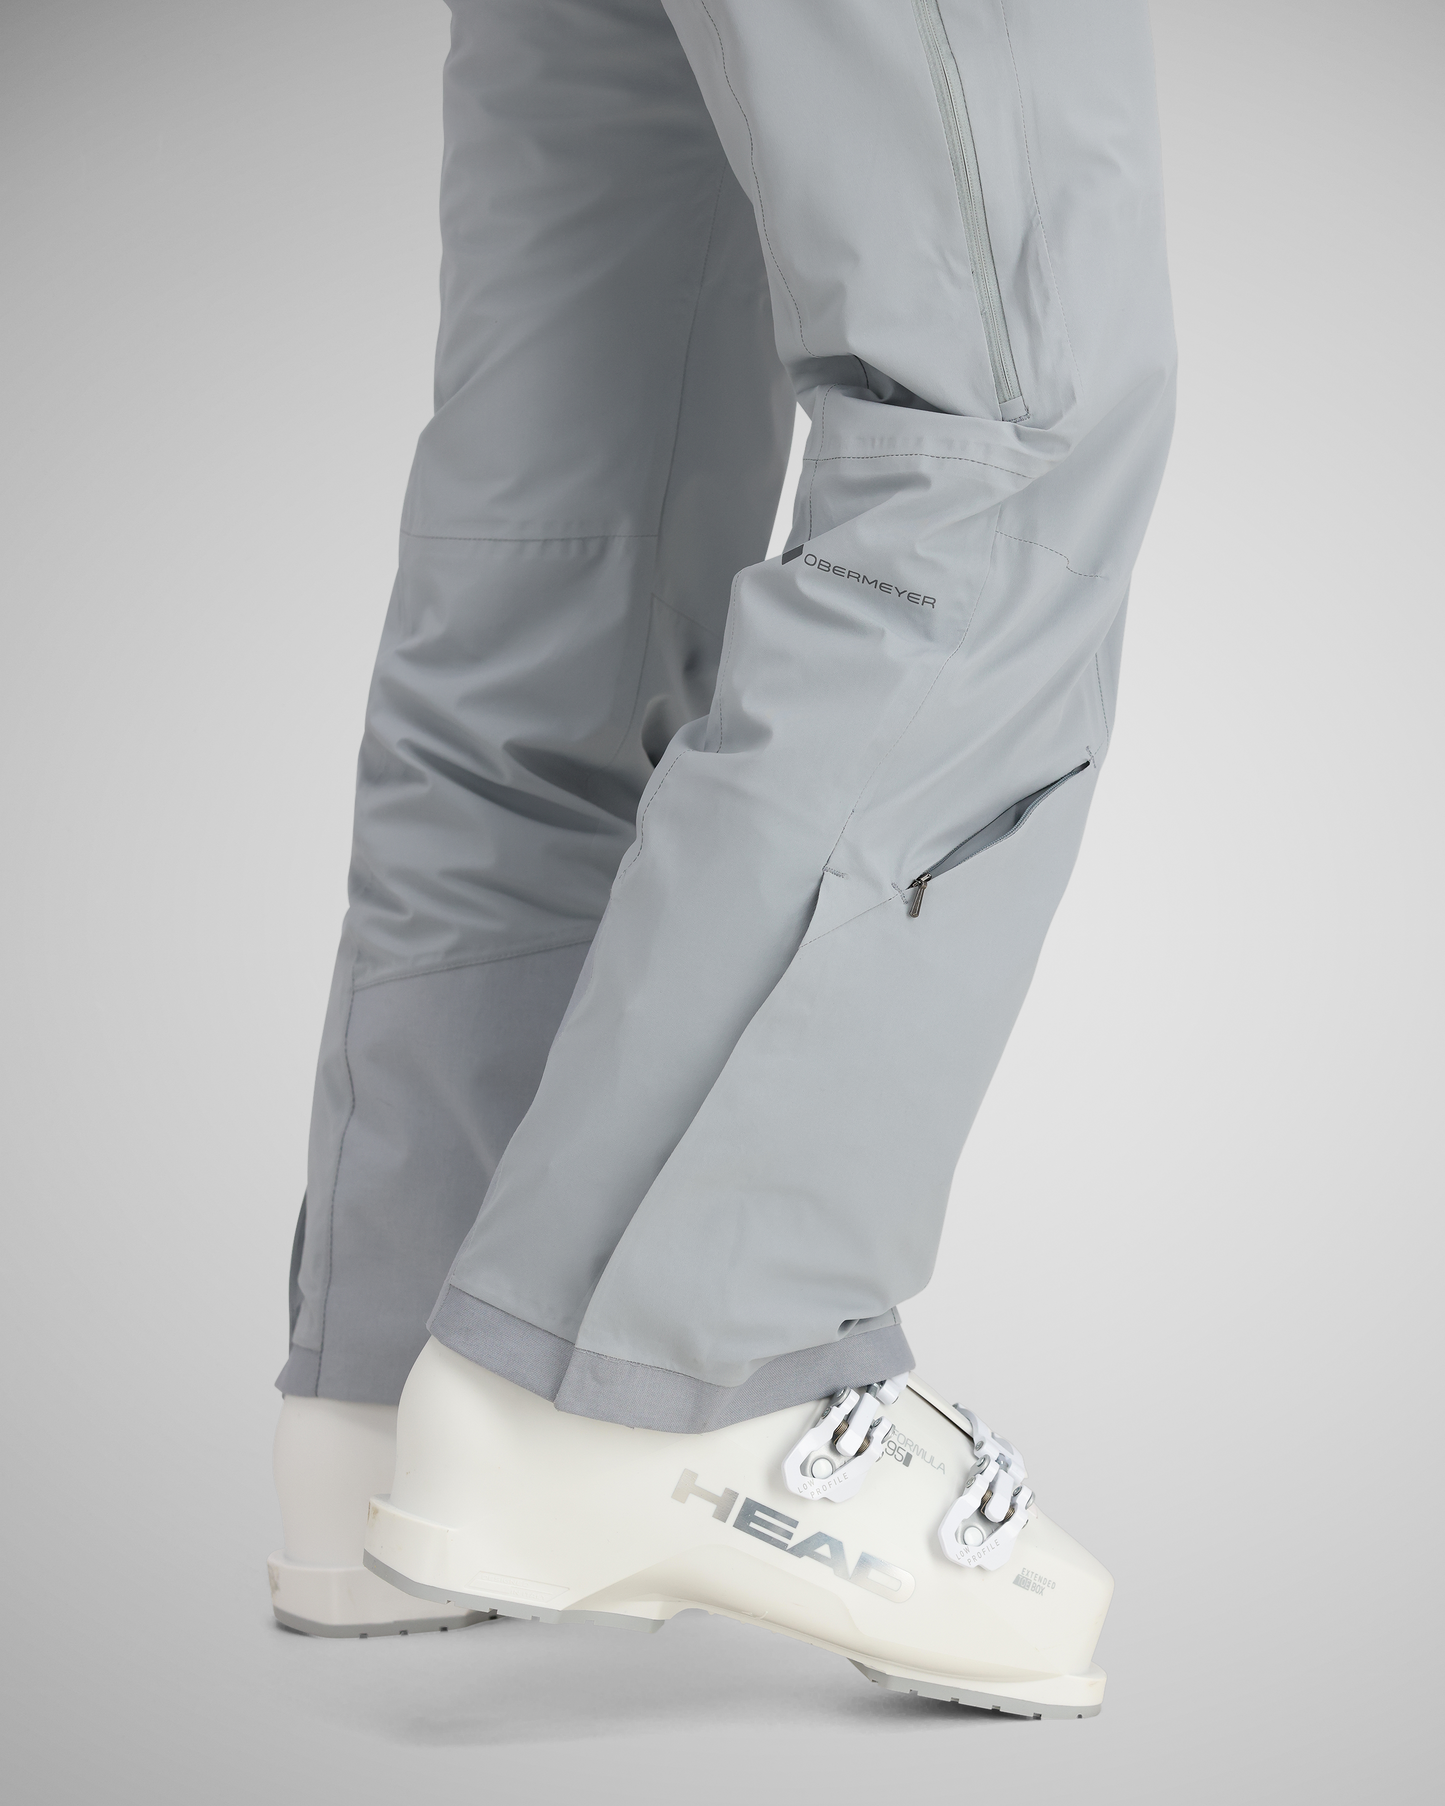 Lower leg pocket(s) | Keep your stuff safe in this hidden pocket that's hidden on the lower pant leg.